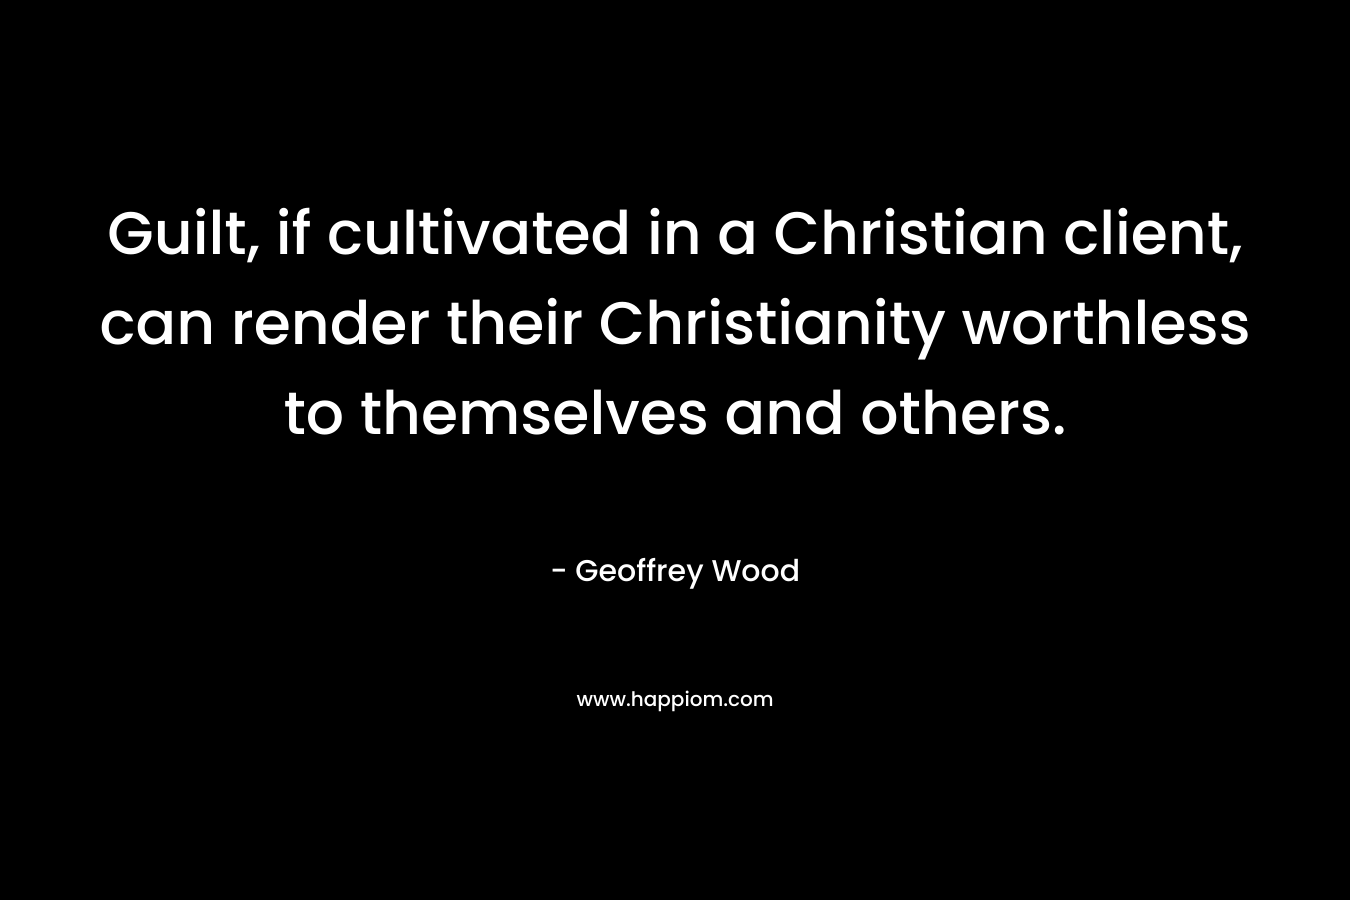 Guilt, if cultivated in a Christian client, can render their Christianity worthless to themselves and others. – Geoffrey Wood